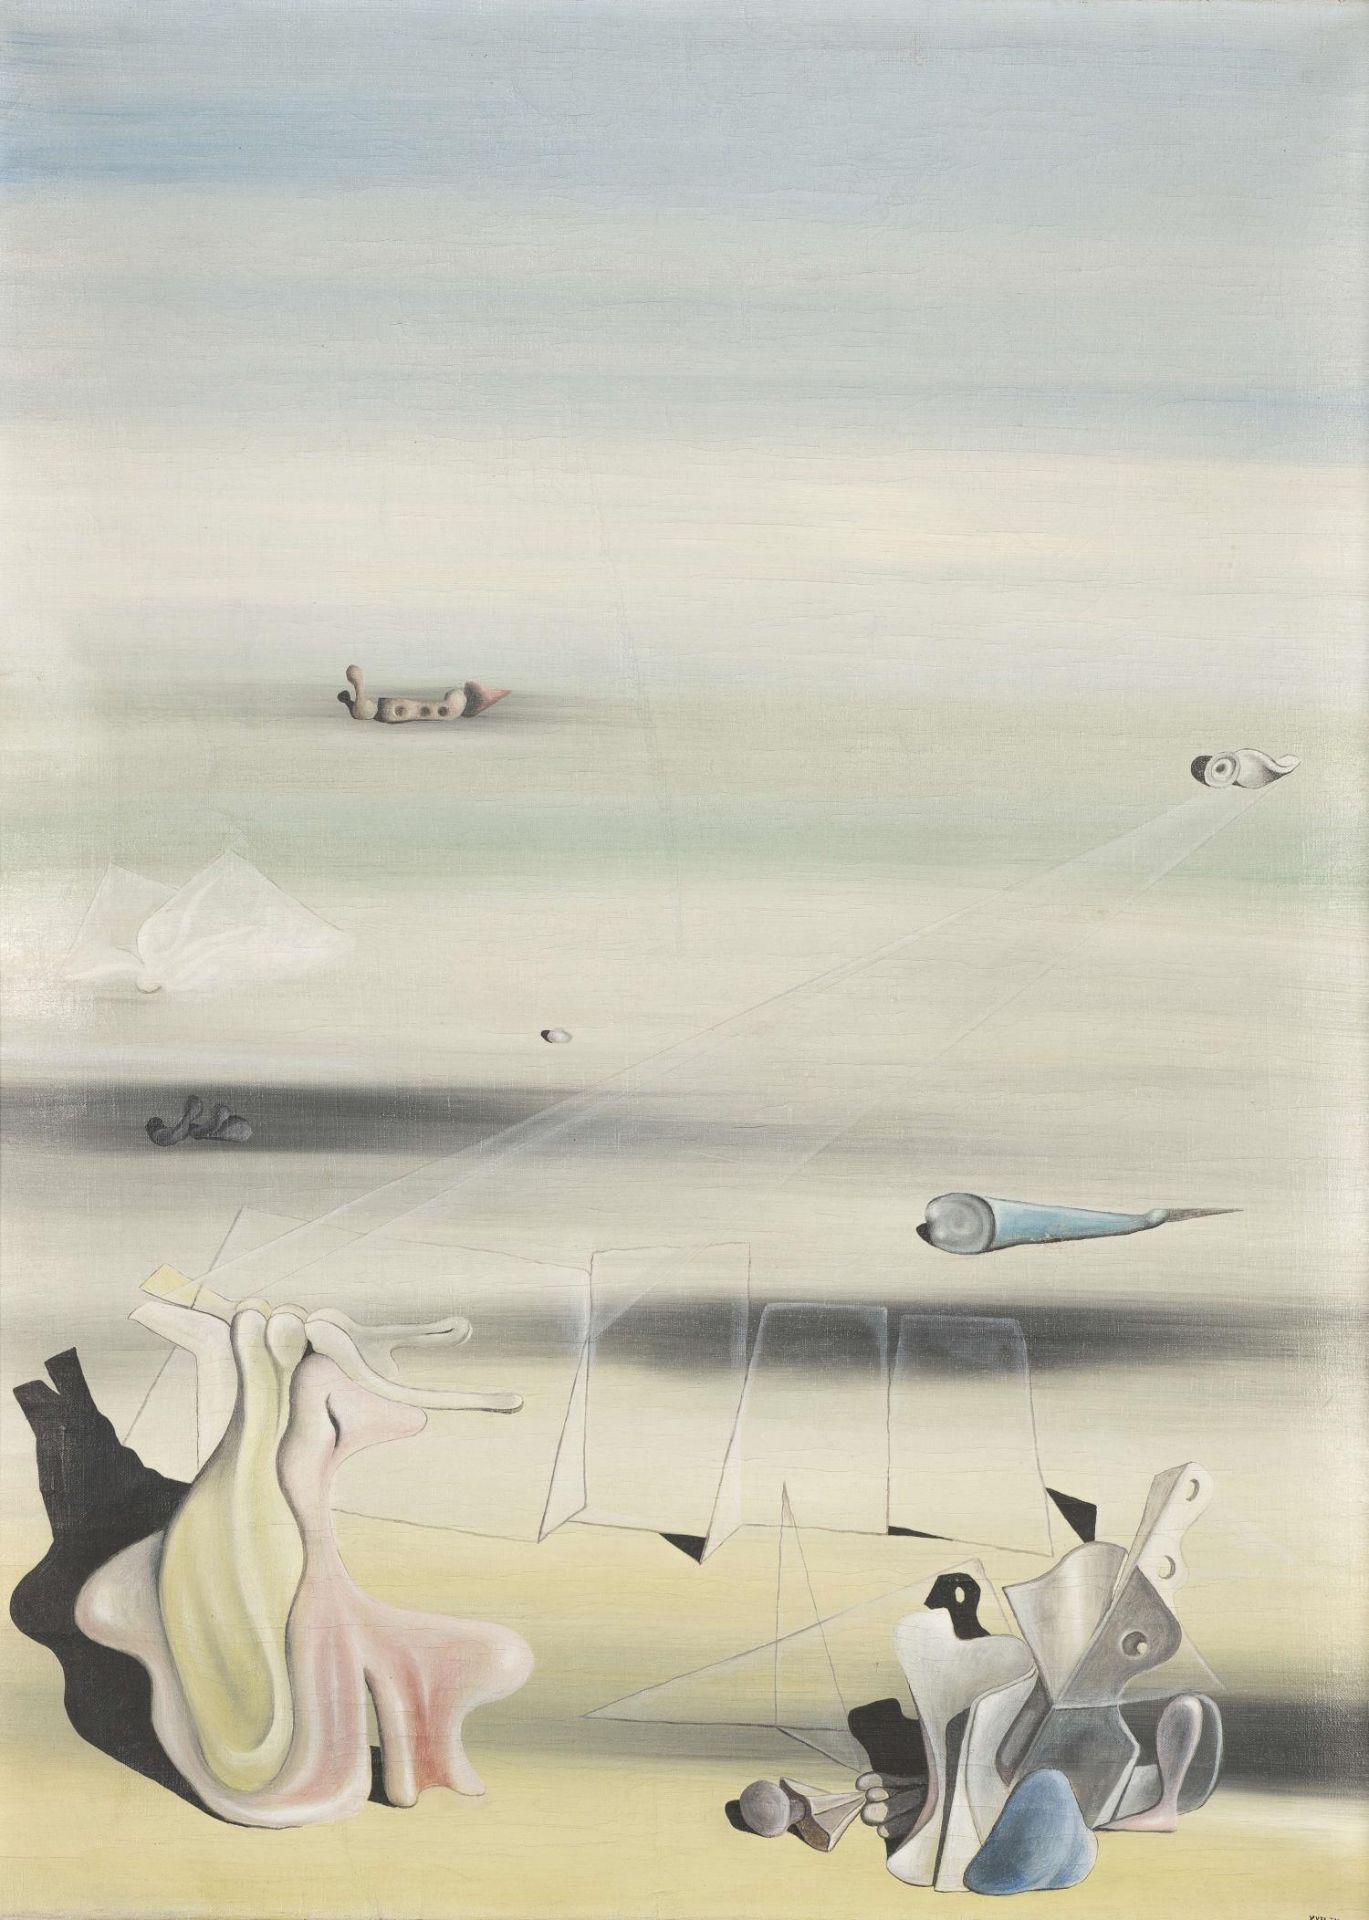 Yves TANGUY (1900-1955) "Titre inconnu"